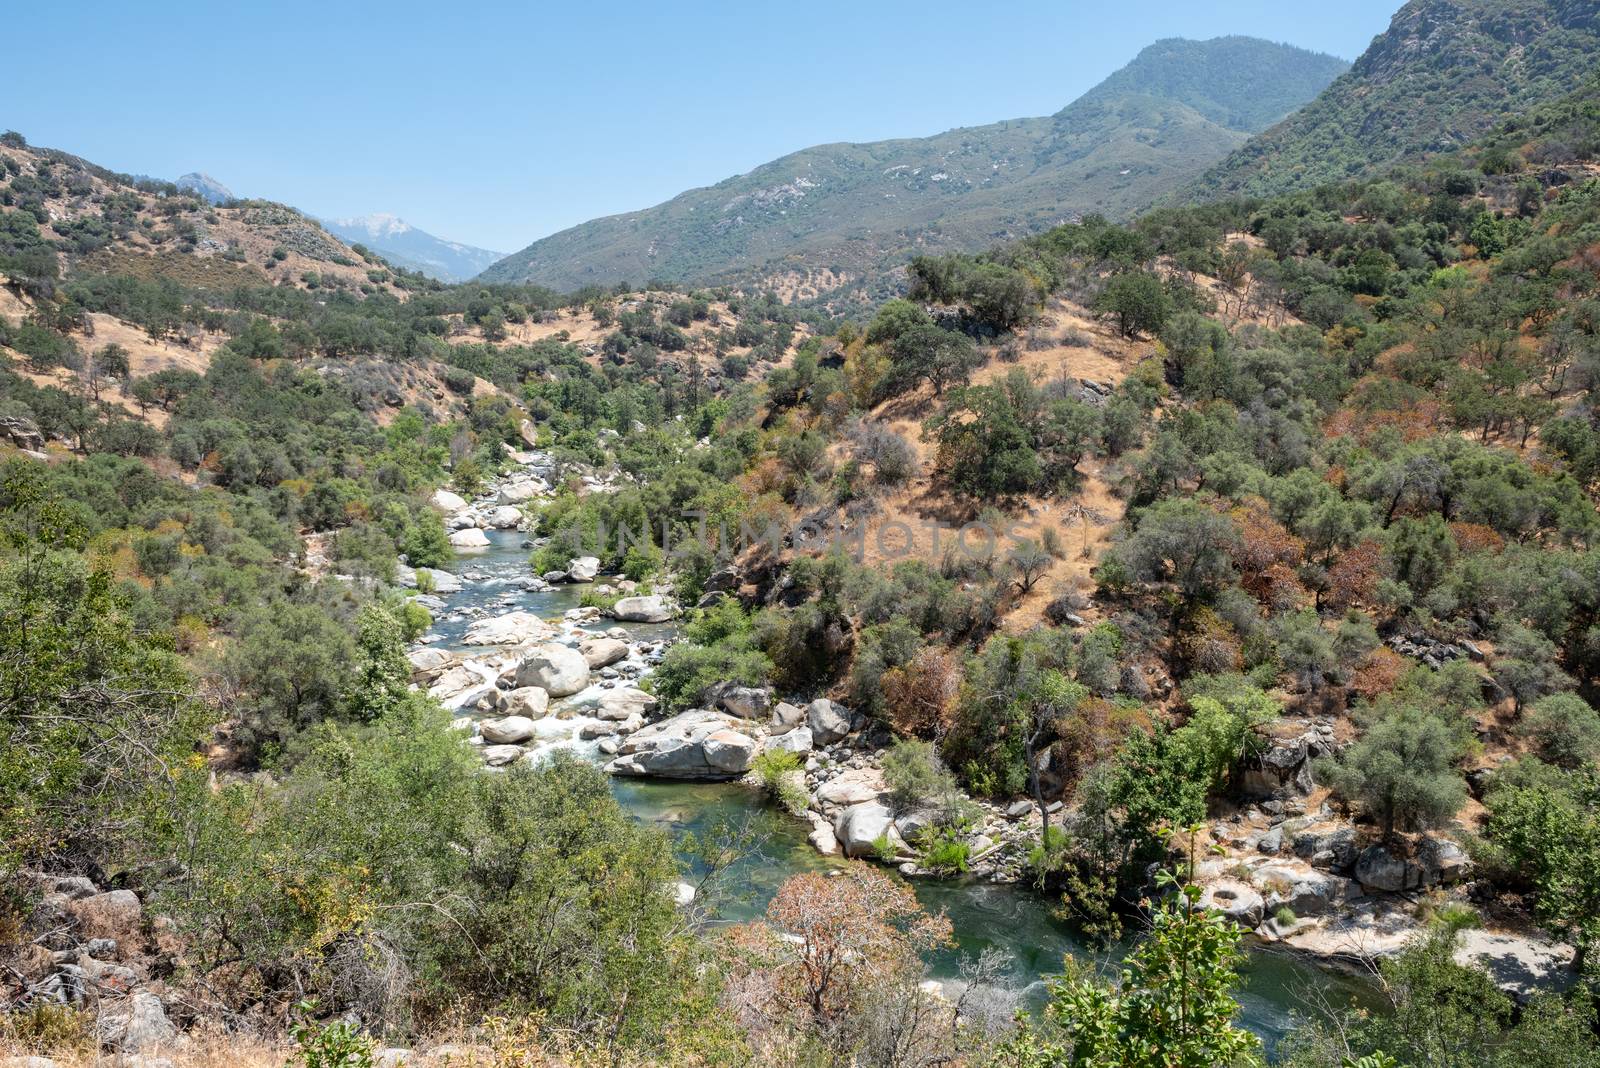 View of the Kaweah River near the entrance to Sequoia National Park, California